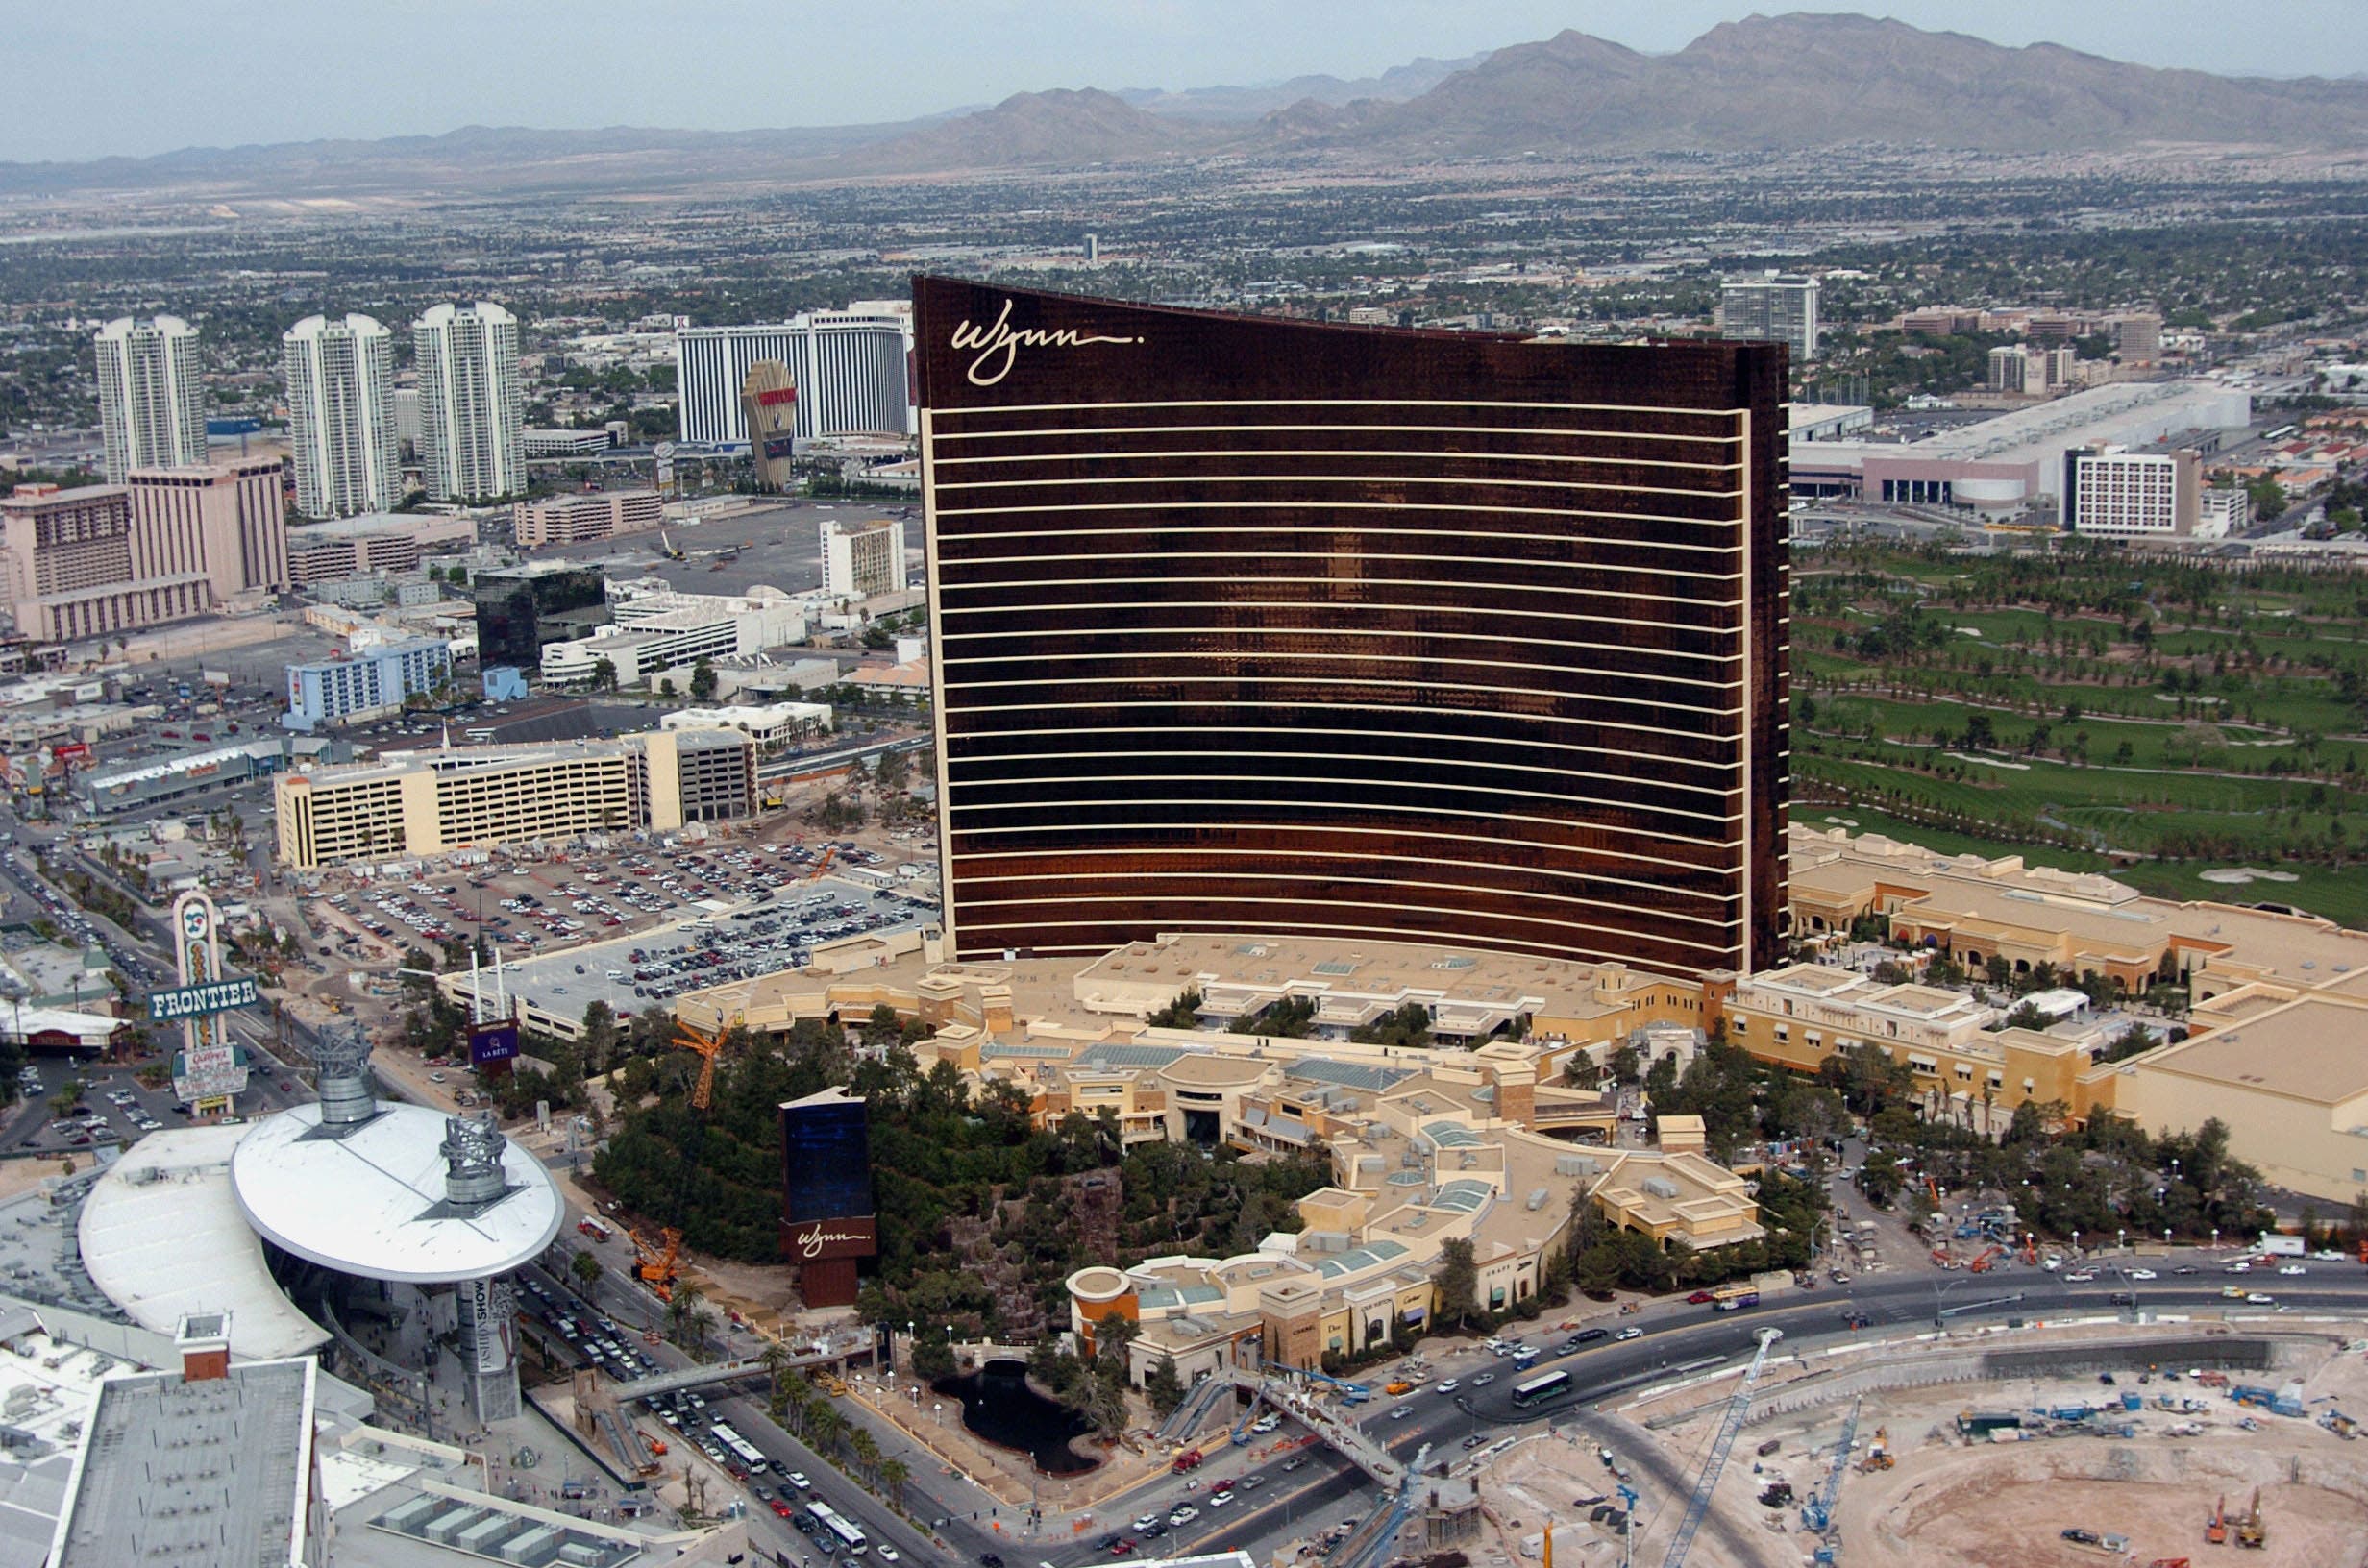 This undated handout image shows the Wynn Hotel in Las Vegas, Nevada. (File photo: AFP)